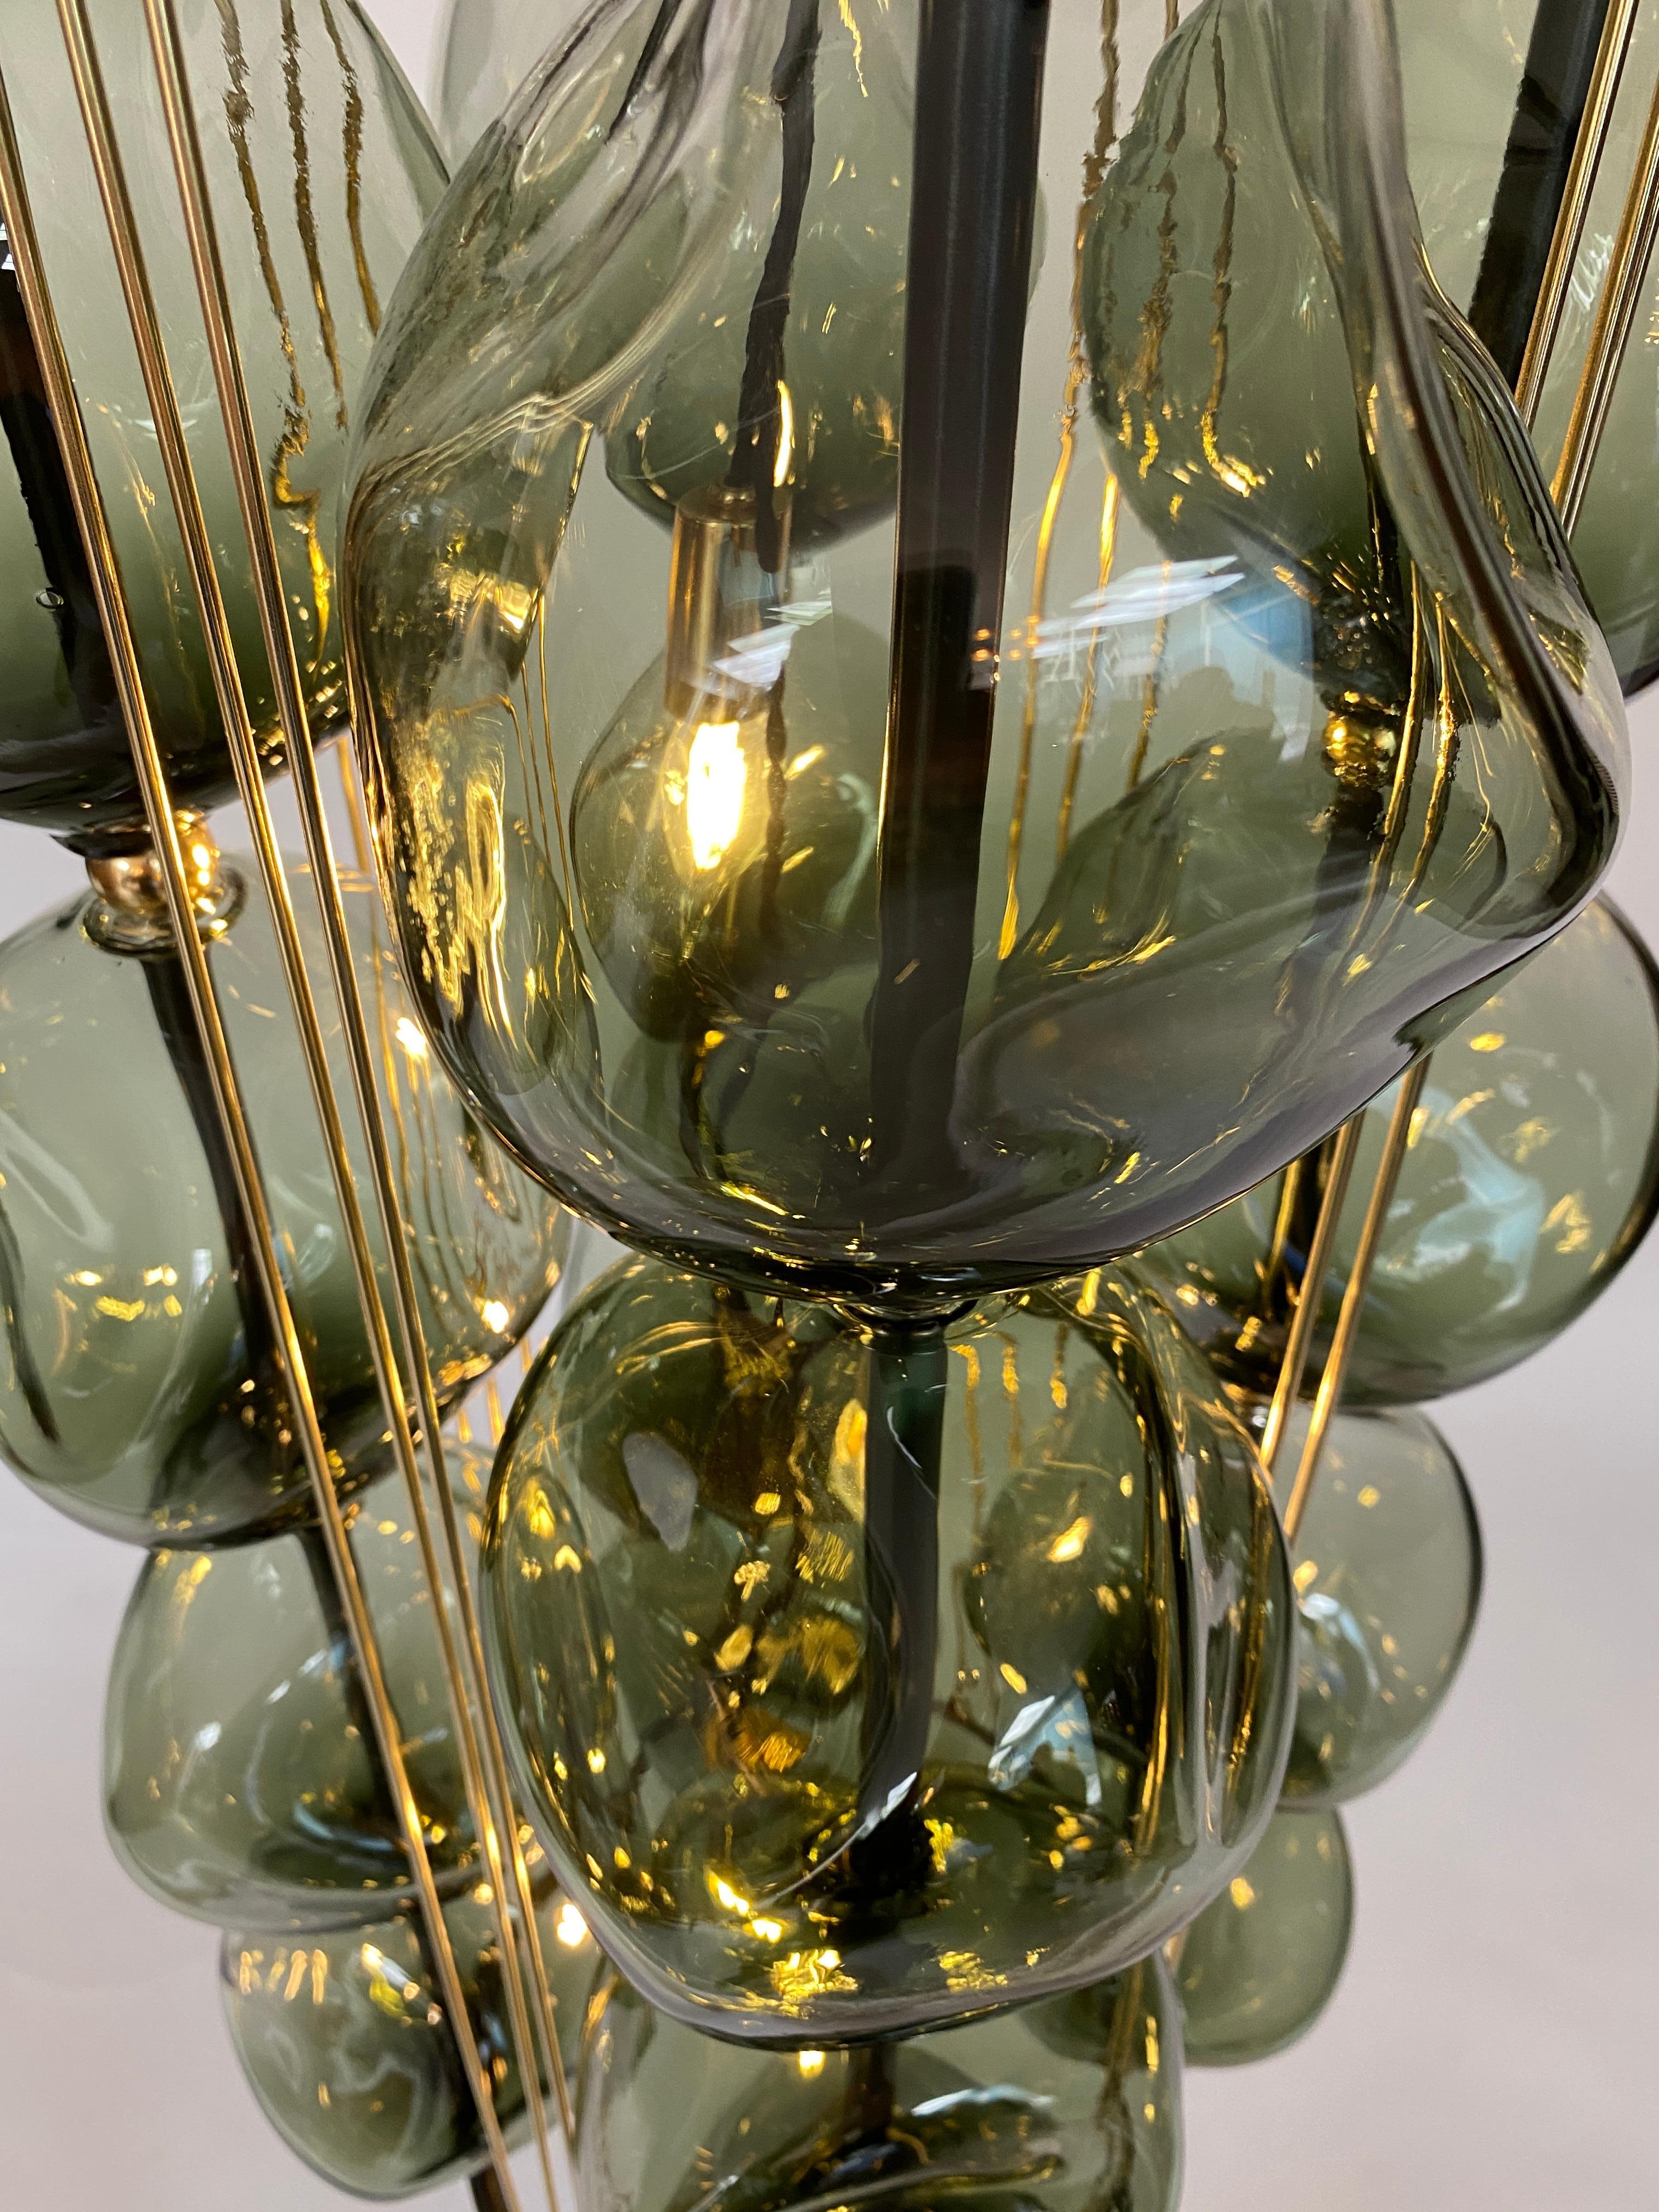 16 orbs hand blown in hunter green Glass glass are assembled on a steel frame with a gun metal patina. The chandelier has brass accents. The light uses 3 candelabra based sockets, Max wattage 60 each bulb.